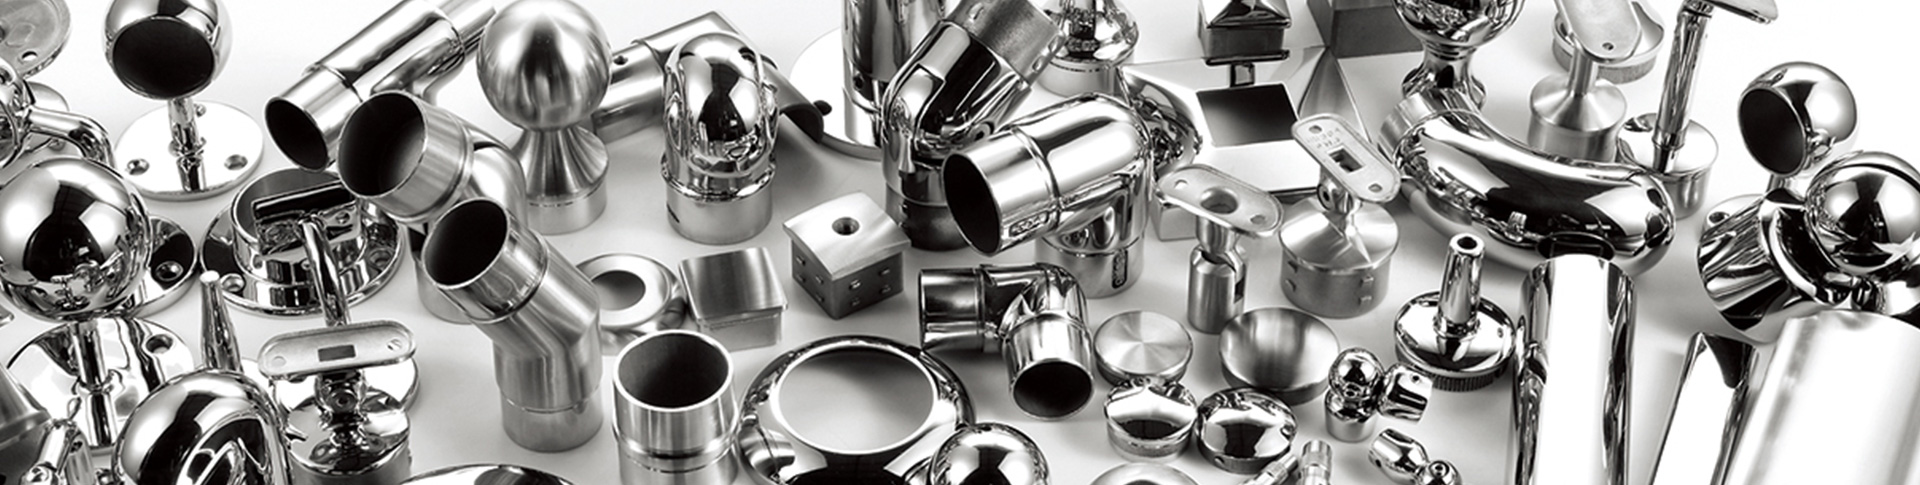 Many different types of handrail fittings.